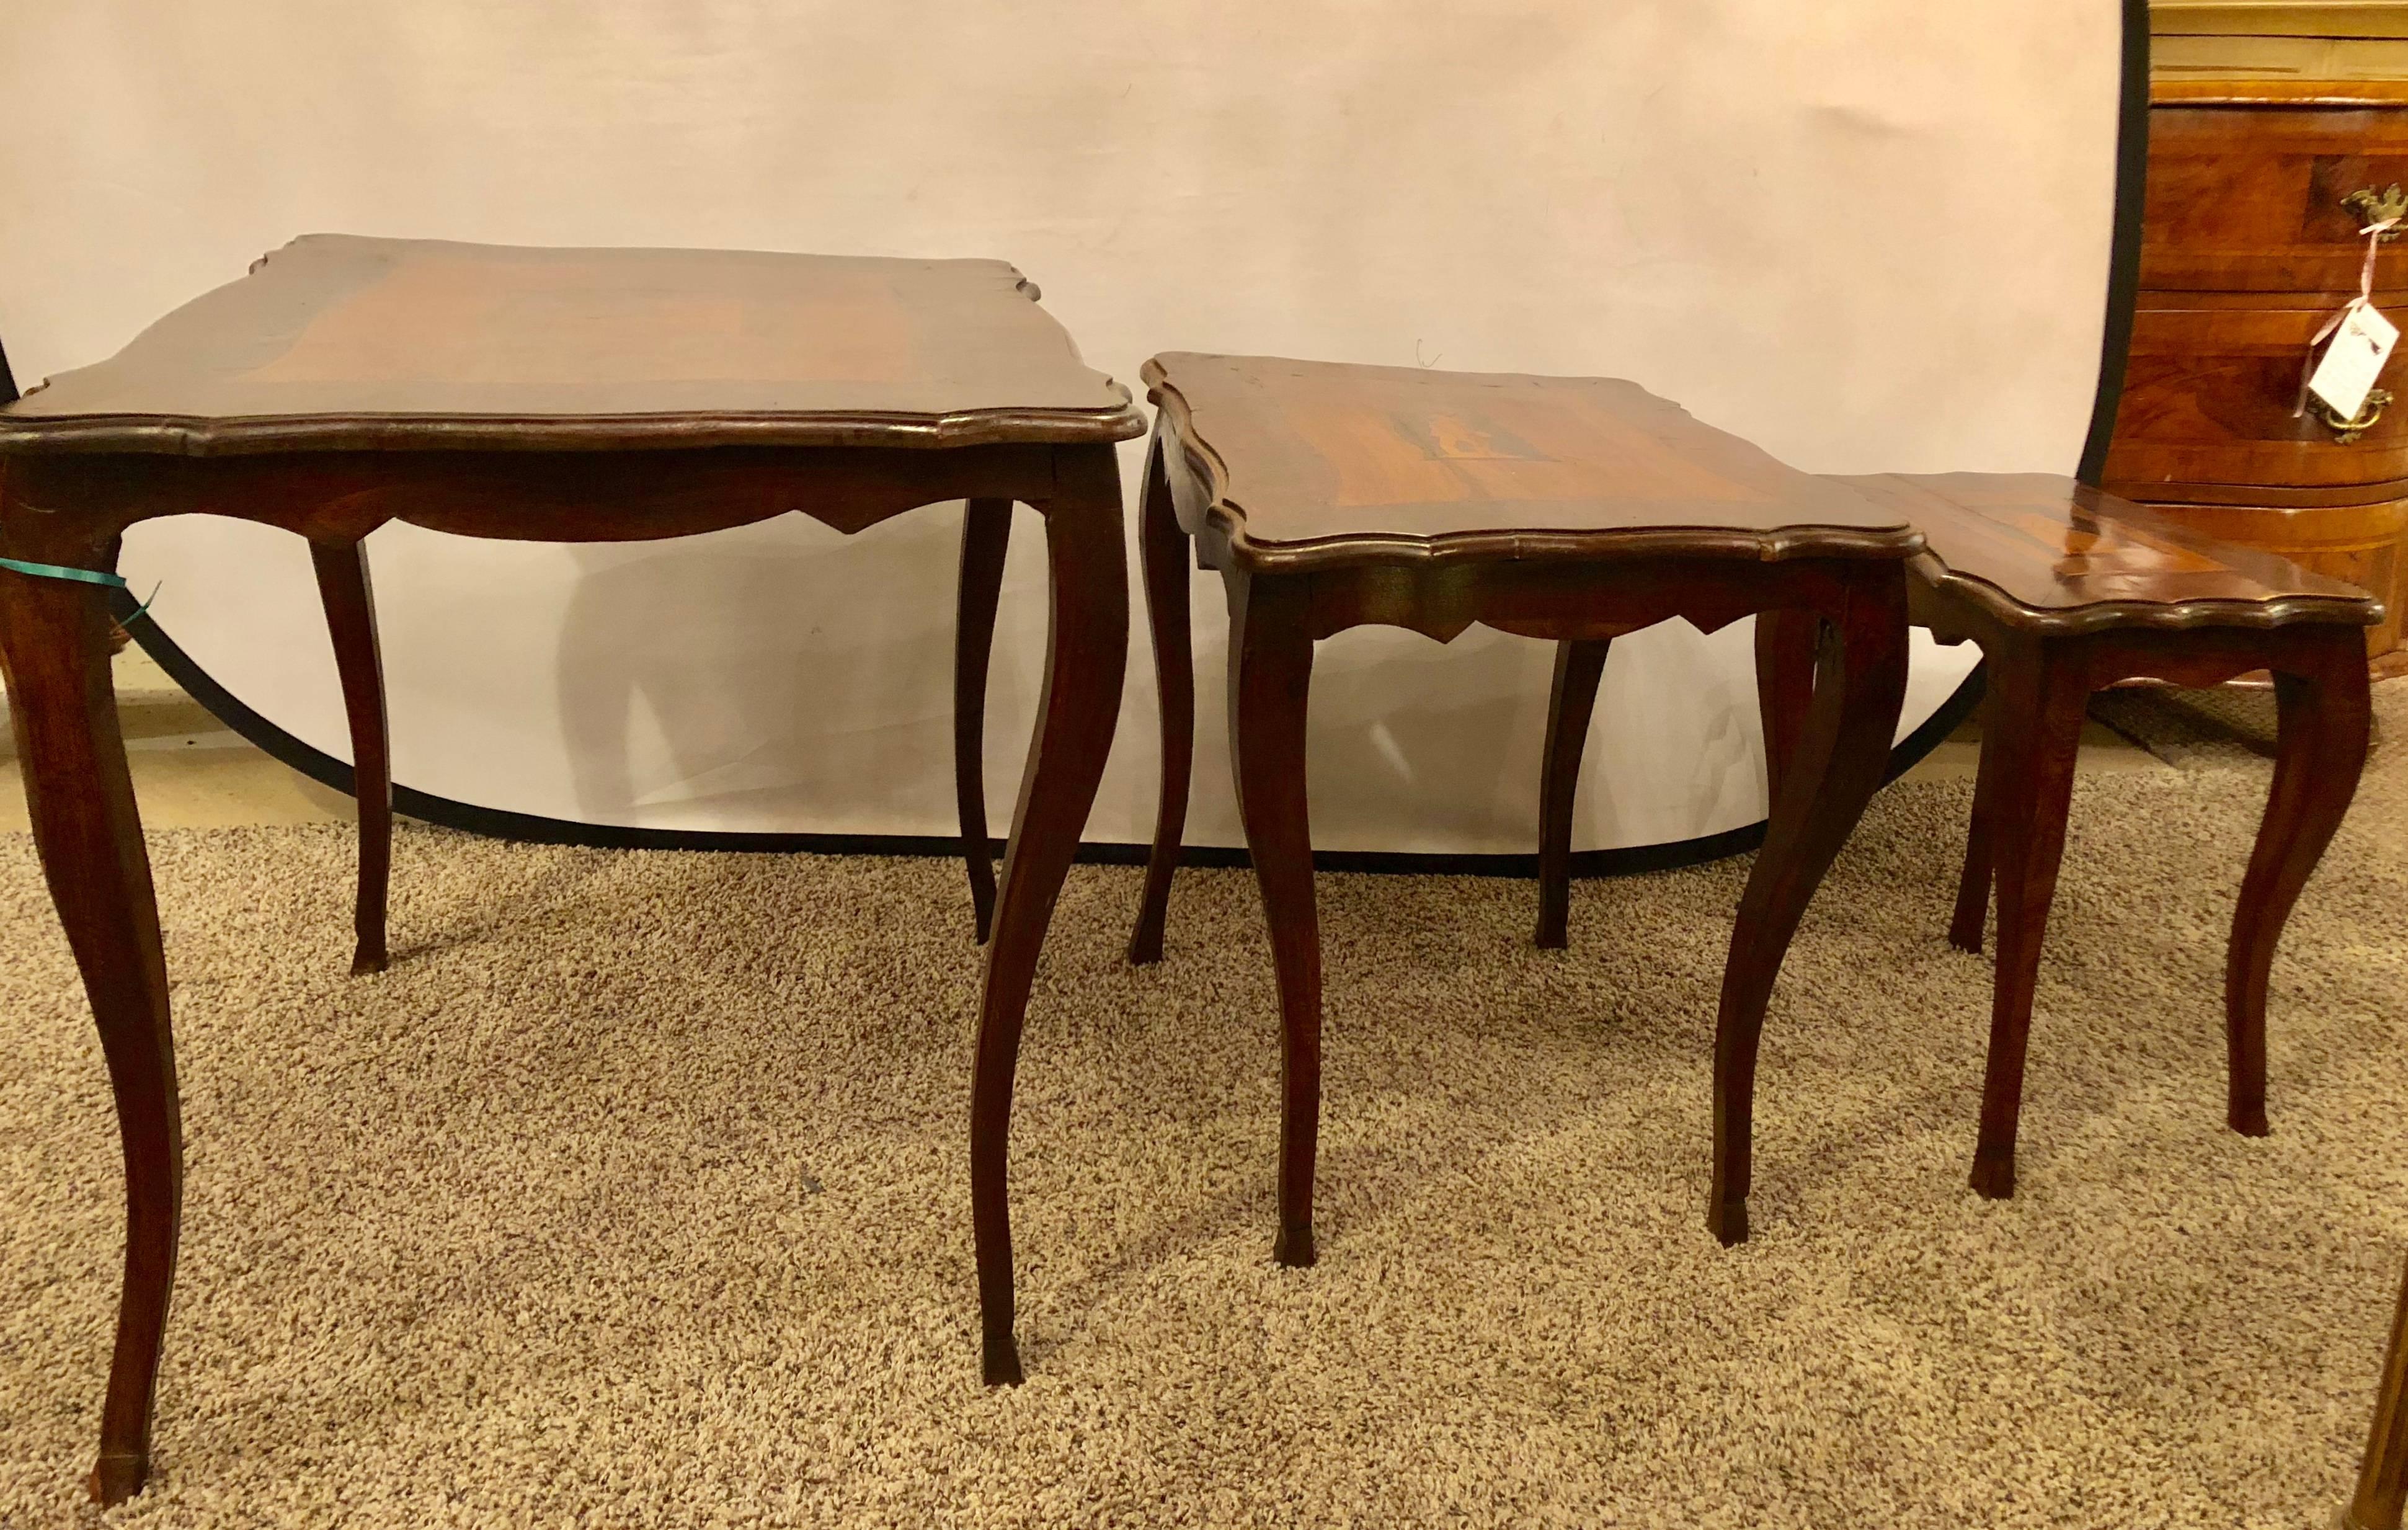 Italian 19th Century Antique Nest Of Three Stack Tables
Dimensions for Largest Table : 24.3 H 27.6 W 22.6 D
Dimensions for smallest Table : 17.75 H 15.75 W 11.38 D